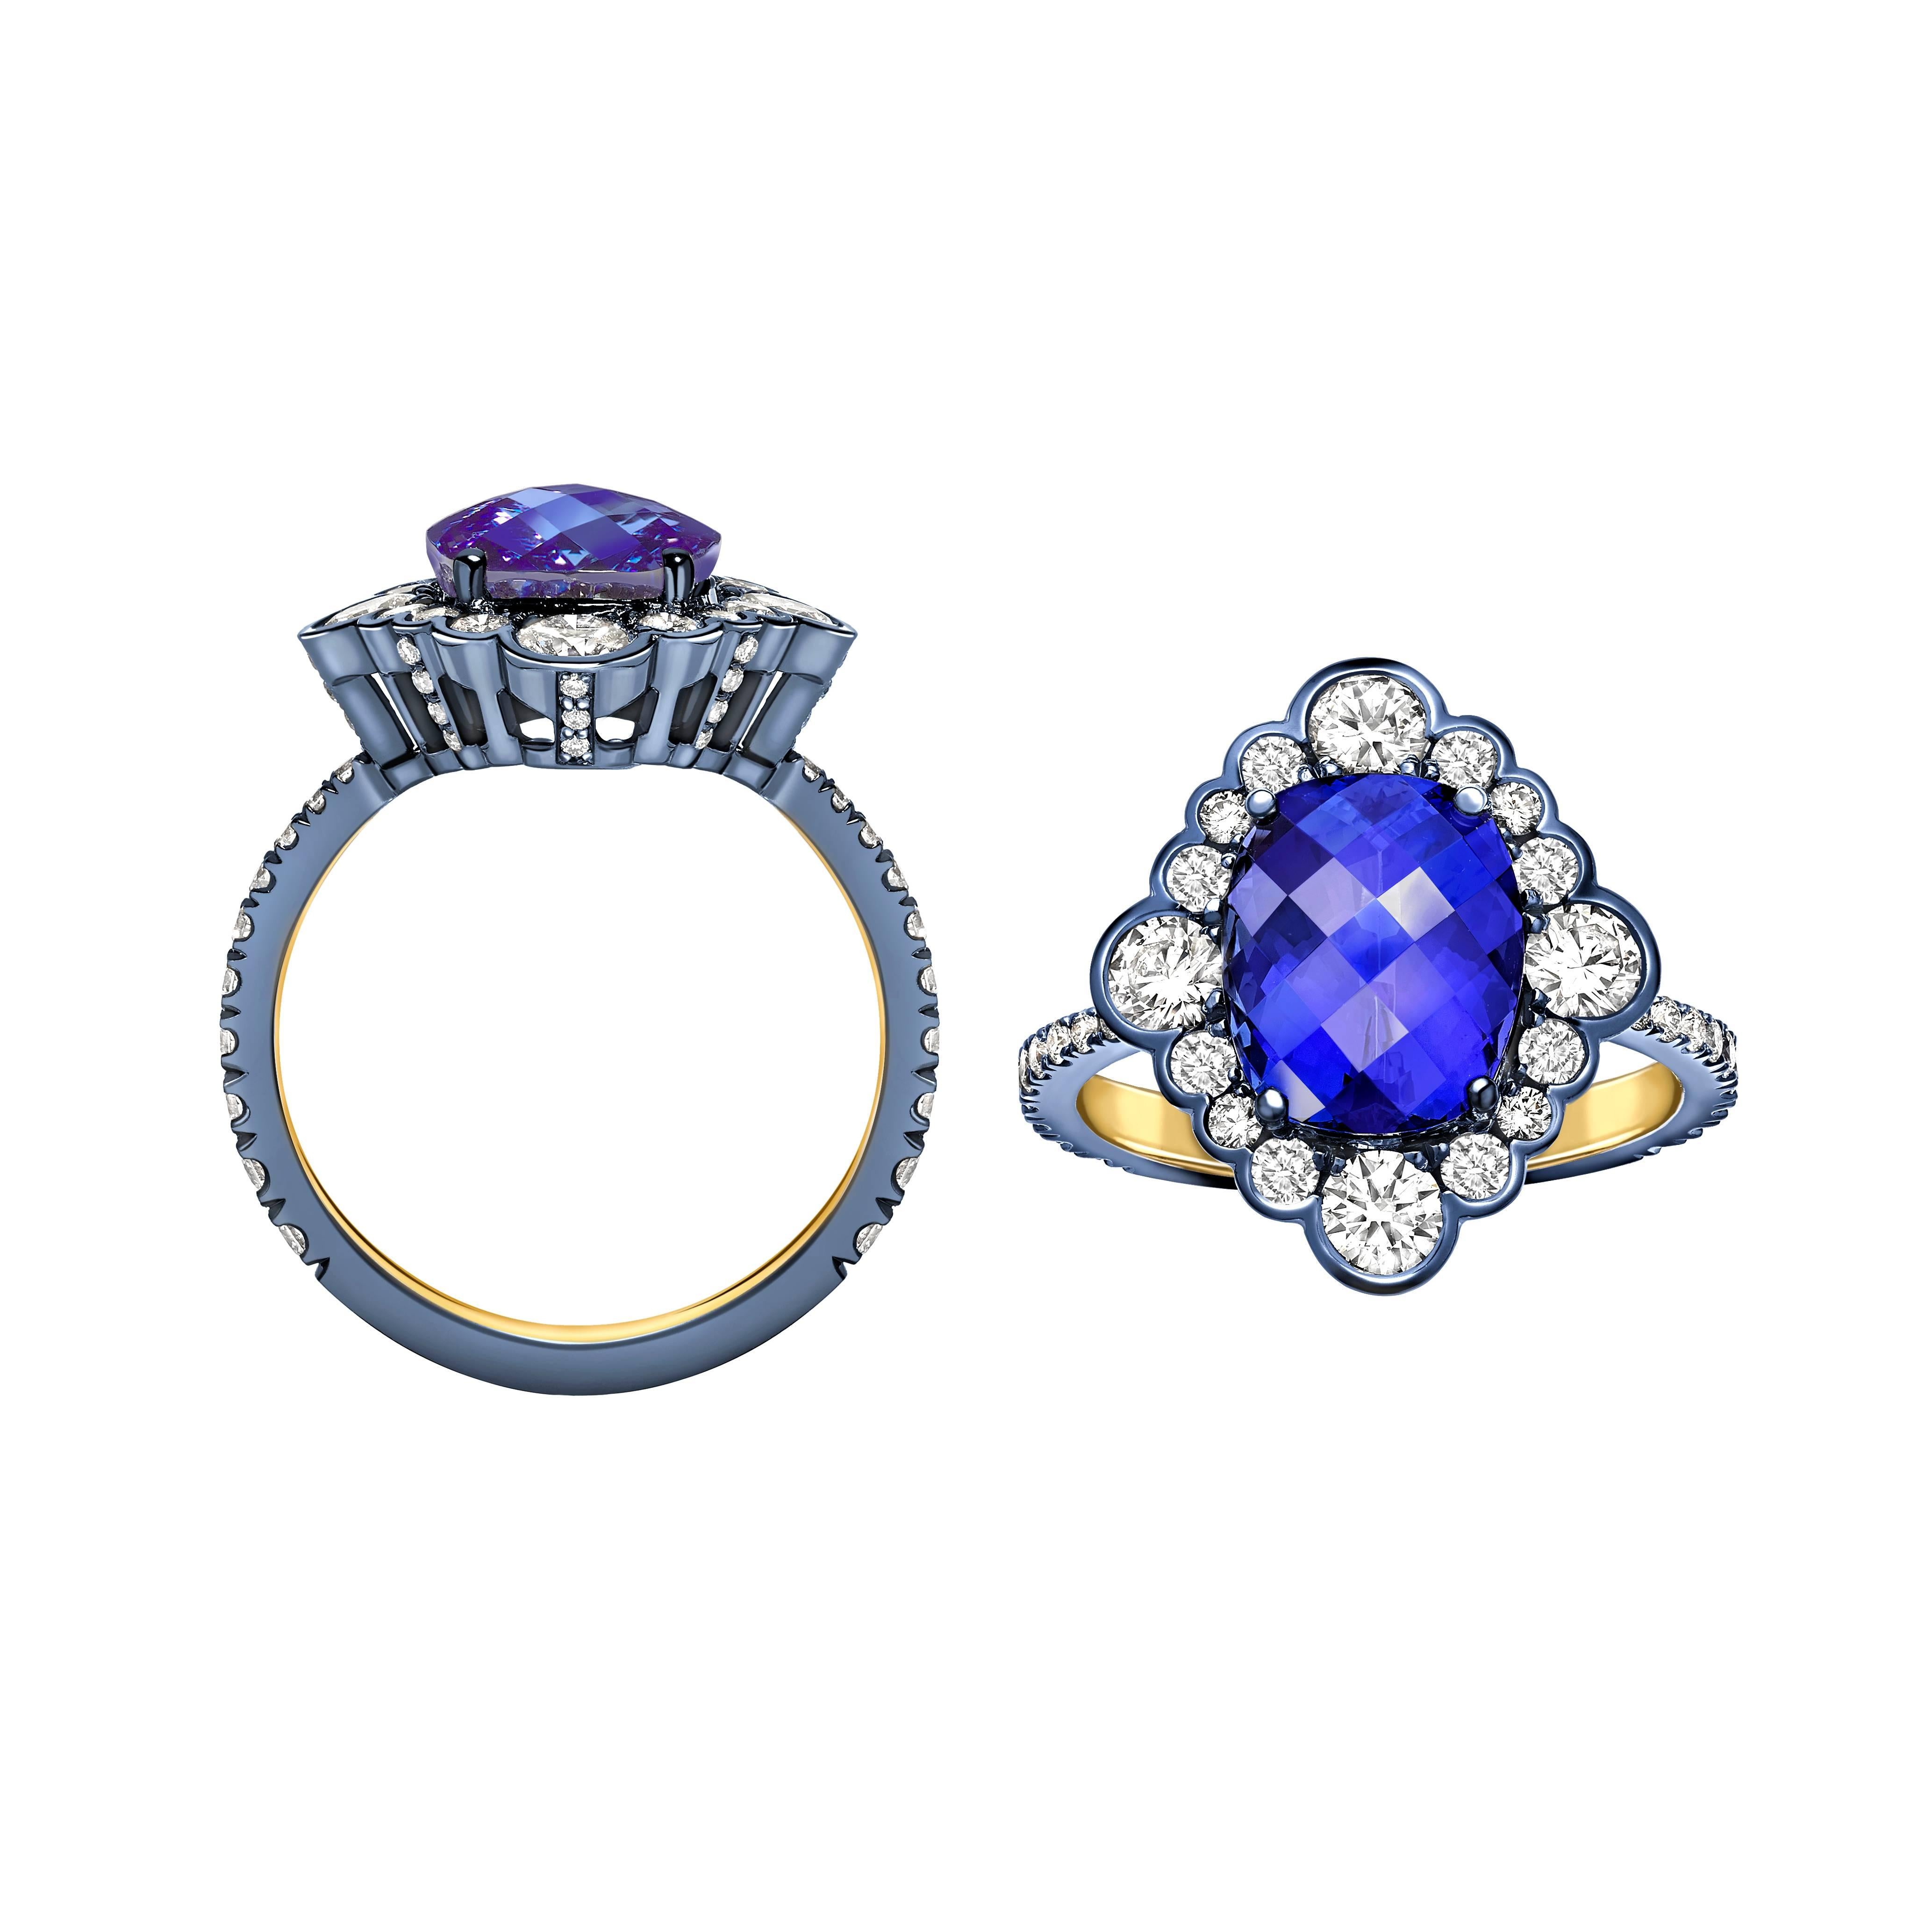 This beautiful ring is a unique one of a kind creation made in our London atelier using the finest craftsmanship and materials.

The tanzanite is a cushion cut with chequerboard detailing on the top and weighs 3.82ct. This is flanked by a beautiful